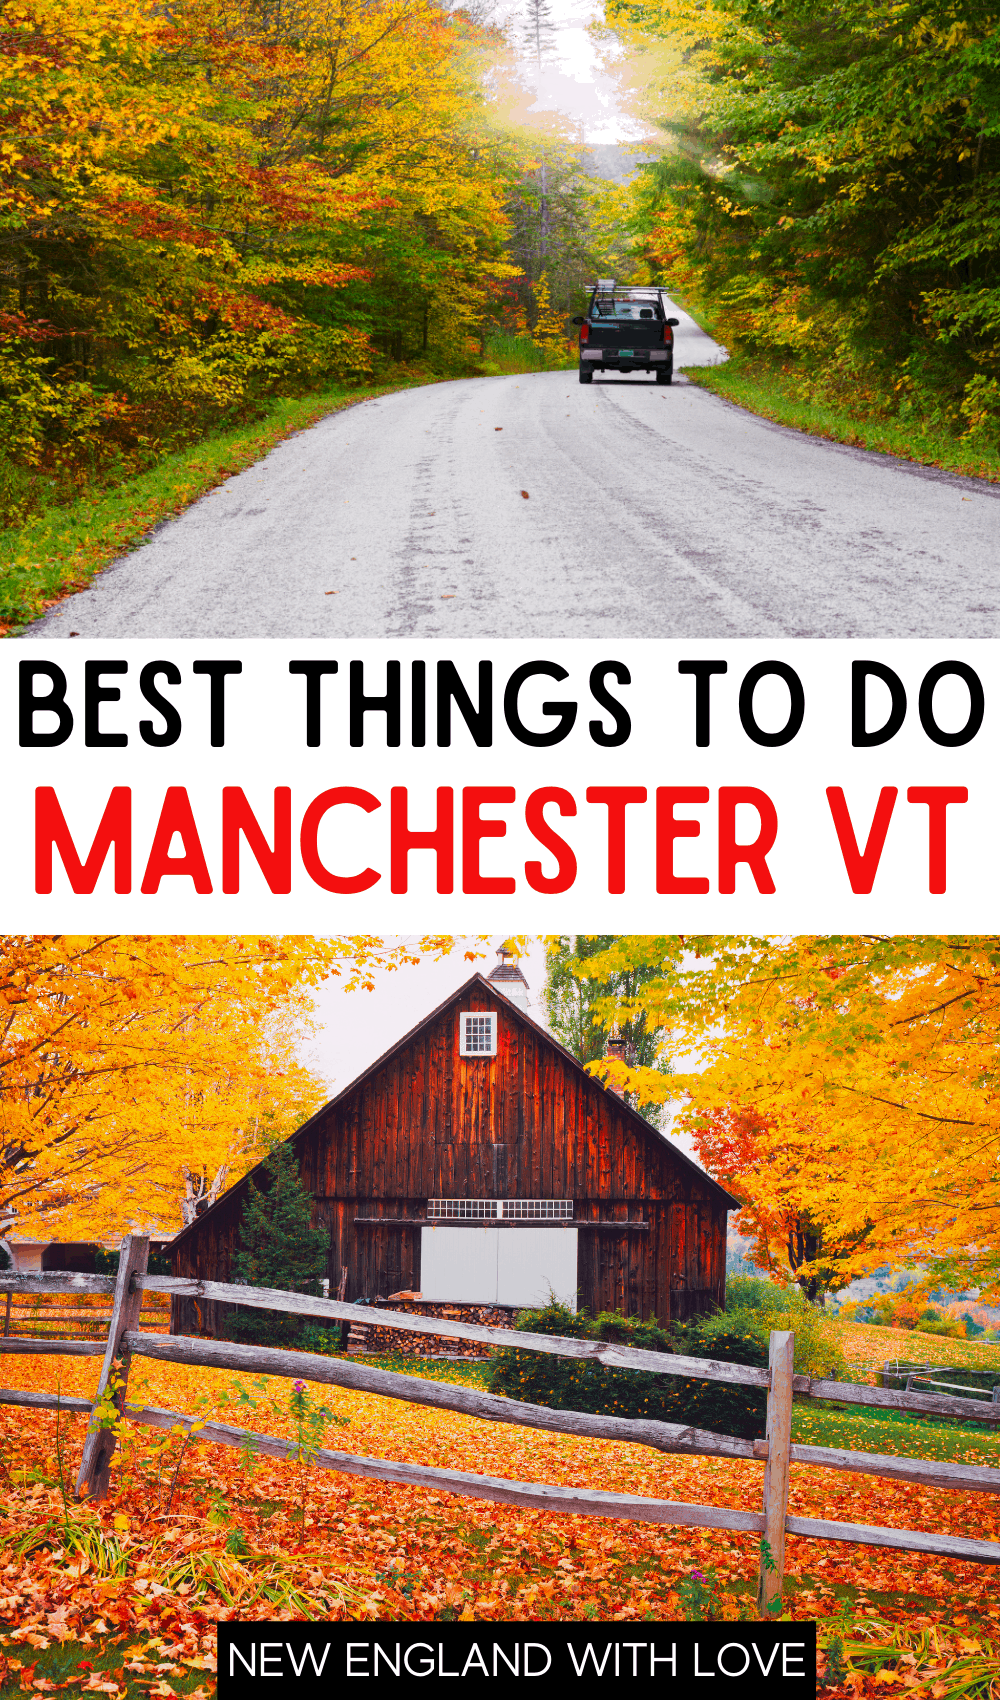 Pinterest graphic reading "BEST THINGS TO DO MANCHESTER VT"